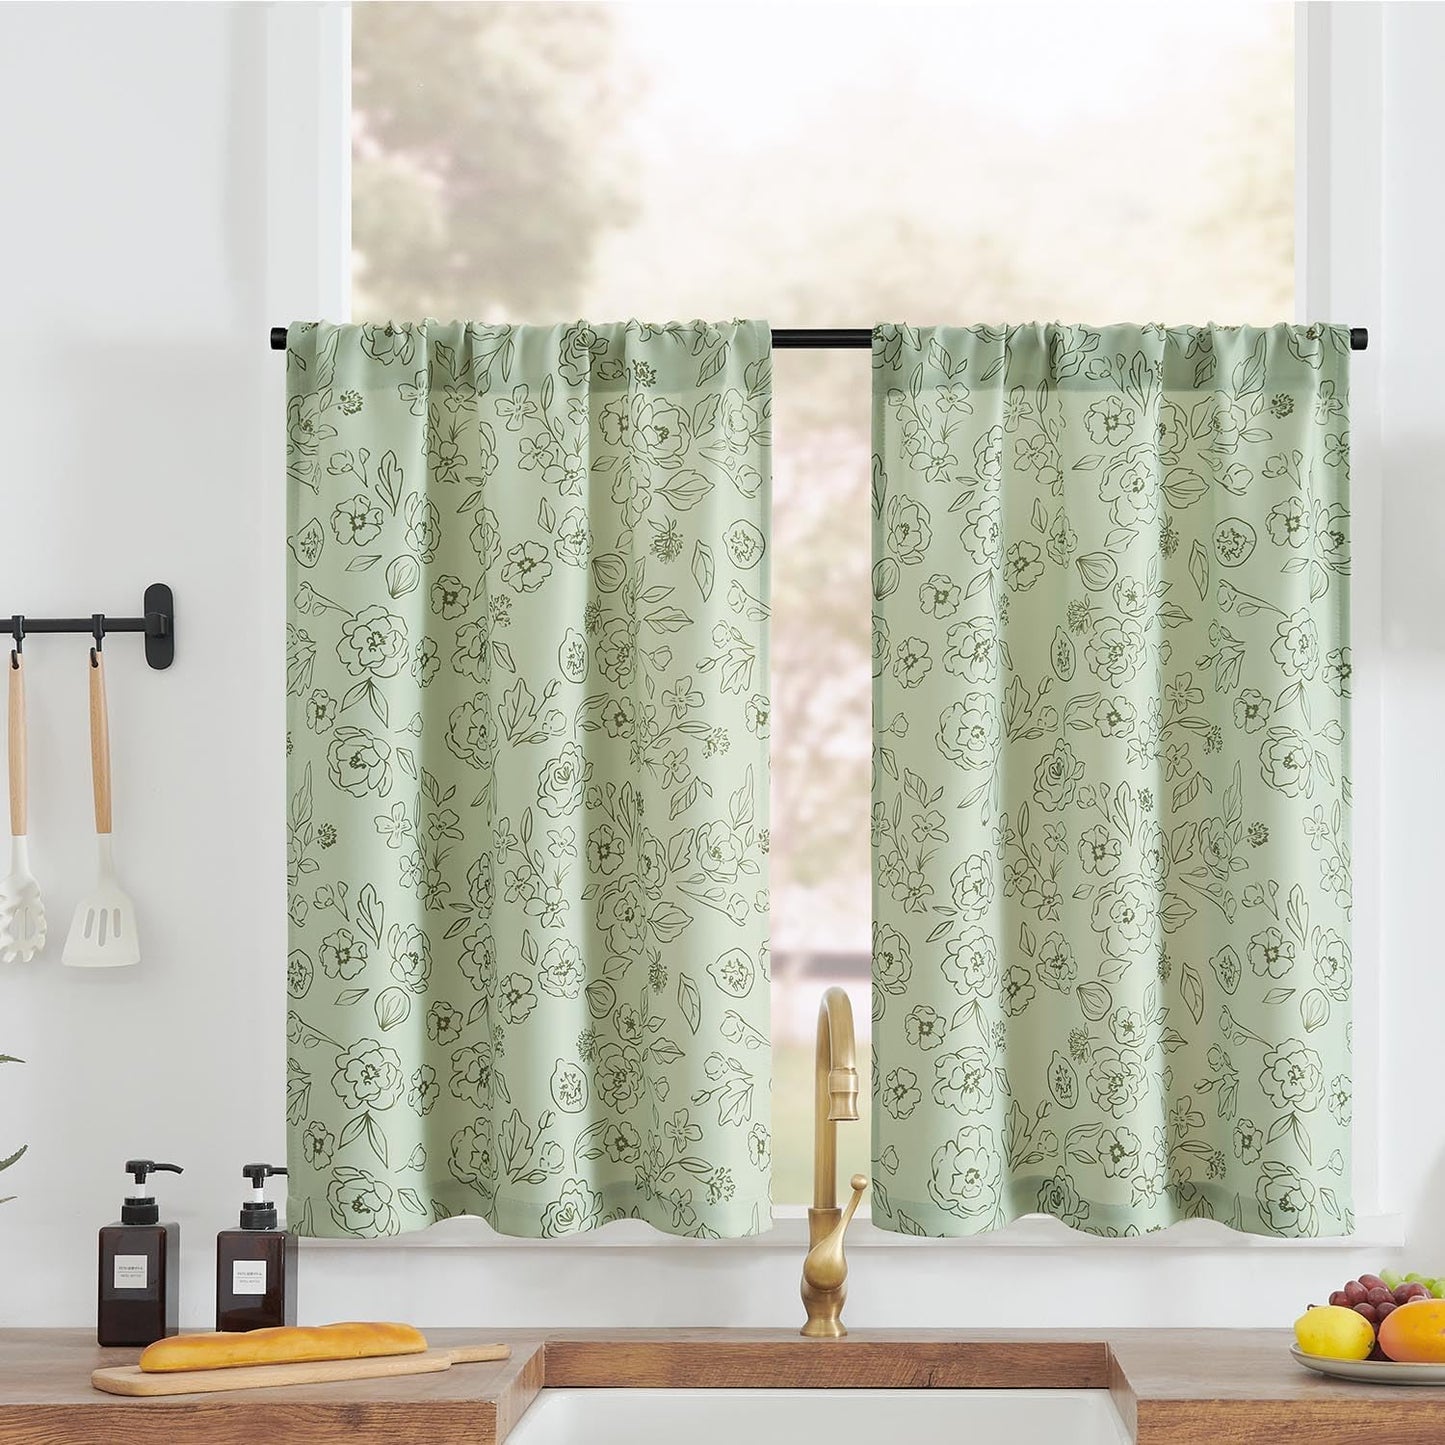 Jinchan Beige Kitchen Curtains Linen Tier Curtains 24 Inch Farmhouse Cafe Curtains Light Filtering Small Window Curtains Flax Country Rustic Rod Pocket Bathroom Laundry Room RV 2 Panels Crude  CKNY HOME FASHION Floral Green 24L 